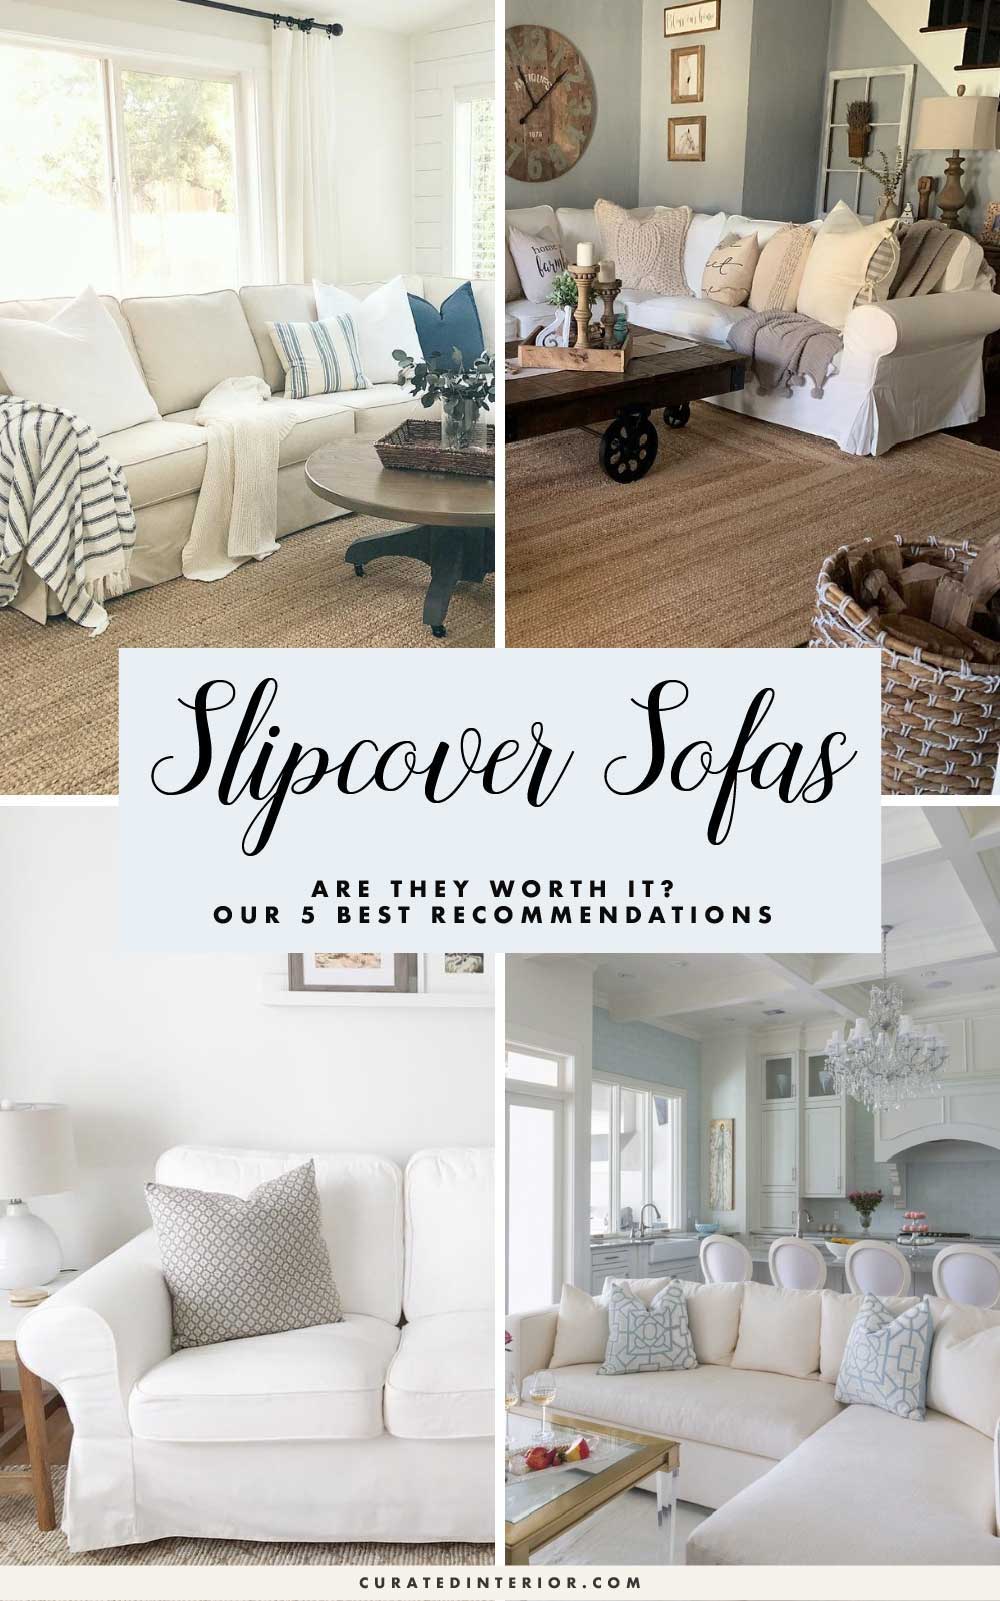 Best Slipcover Sofas - Pros, cons, and recommendations